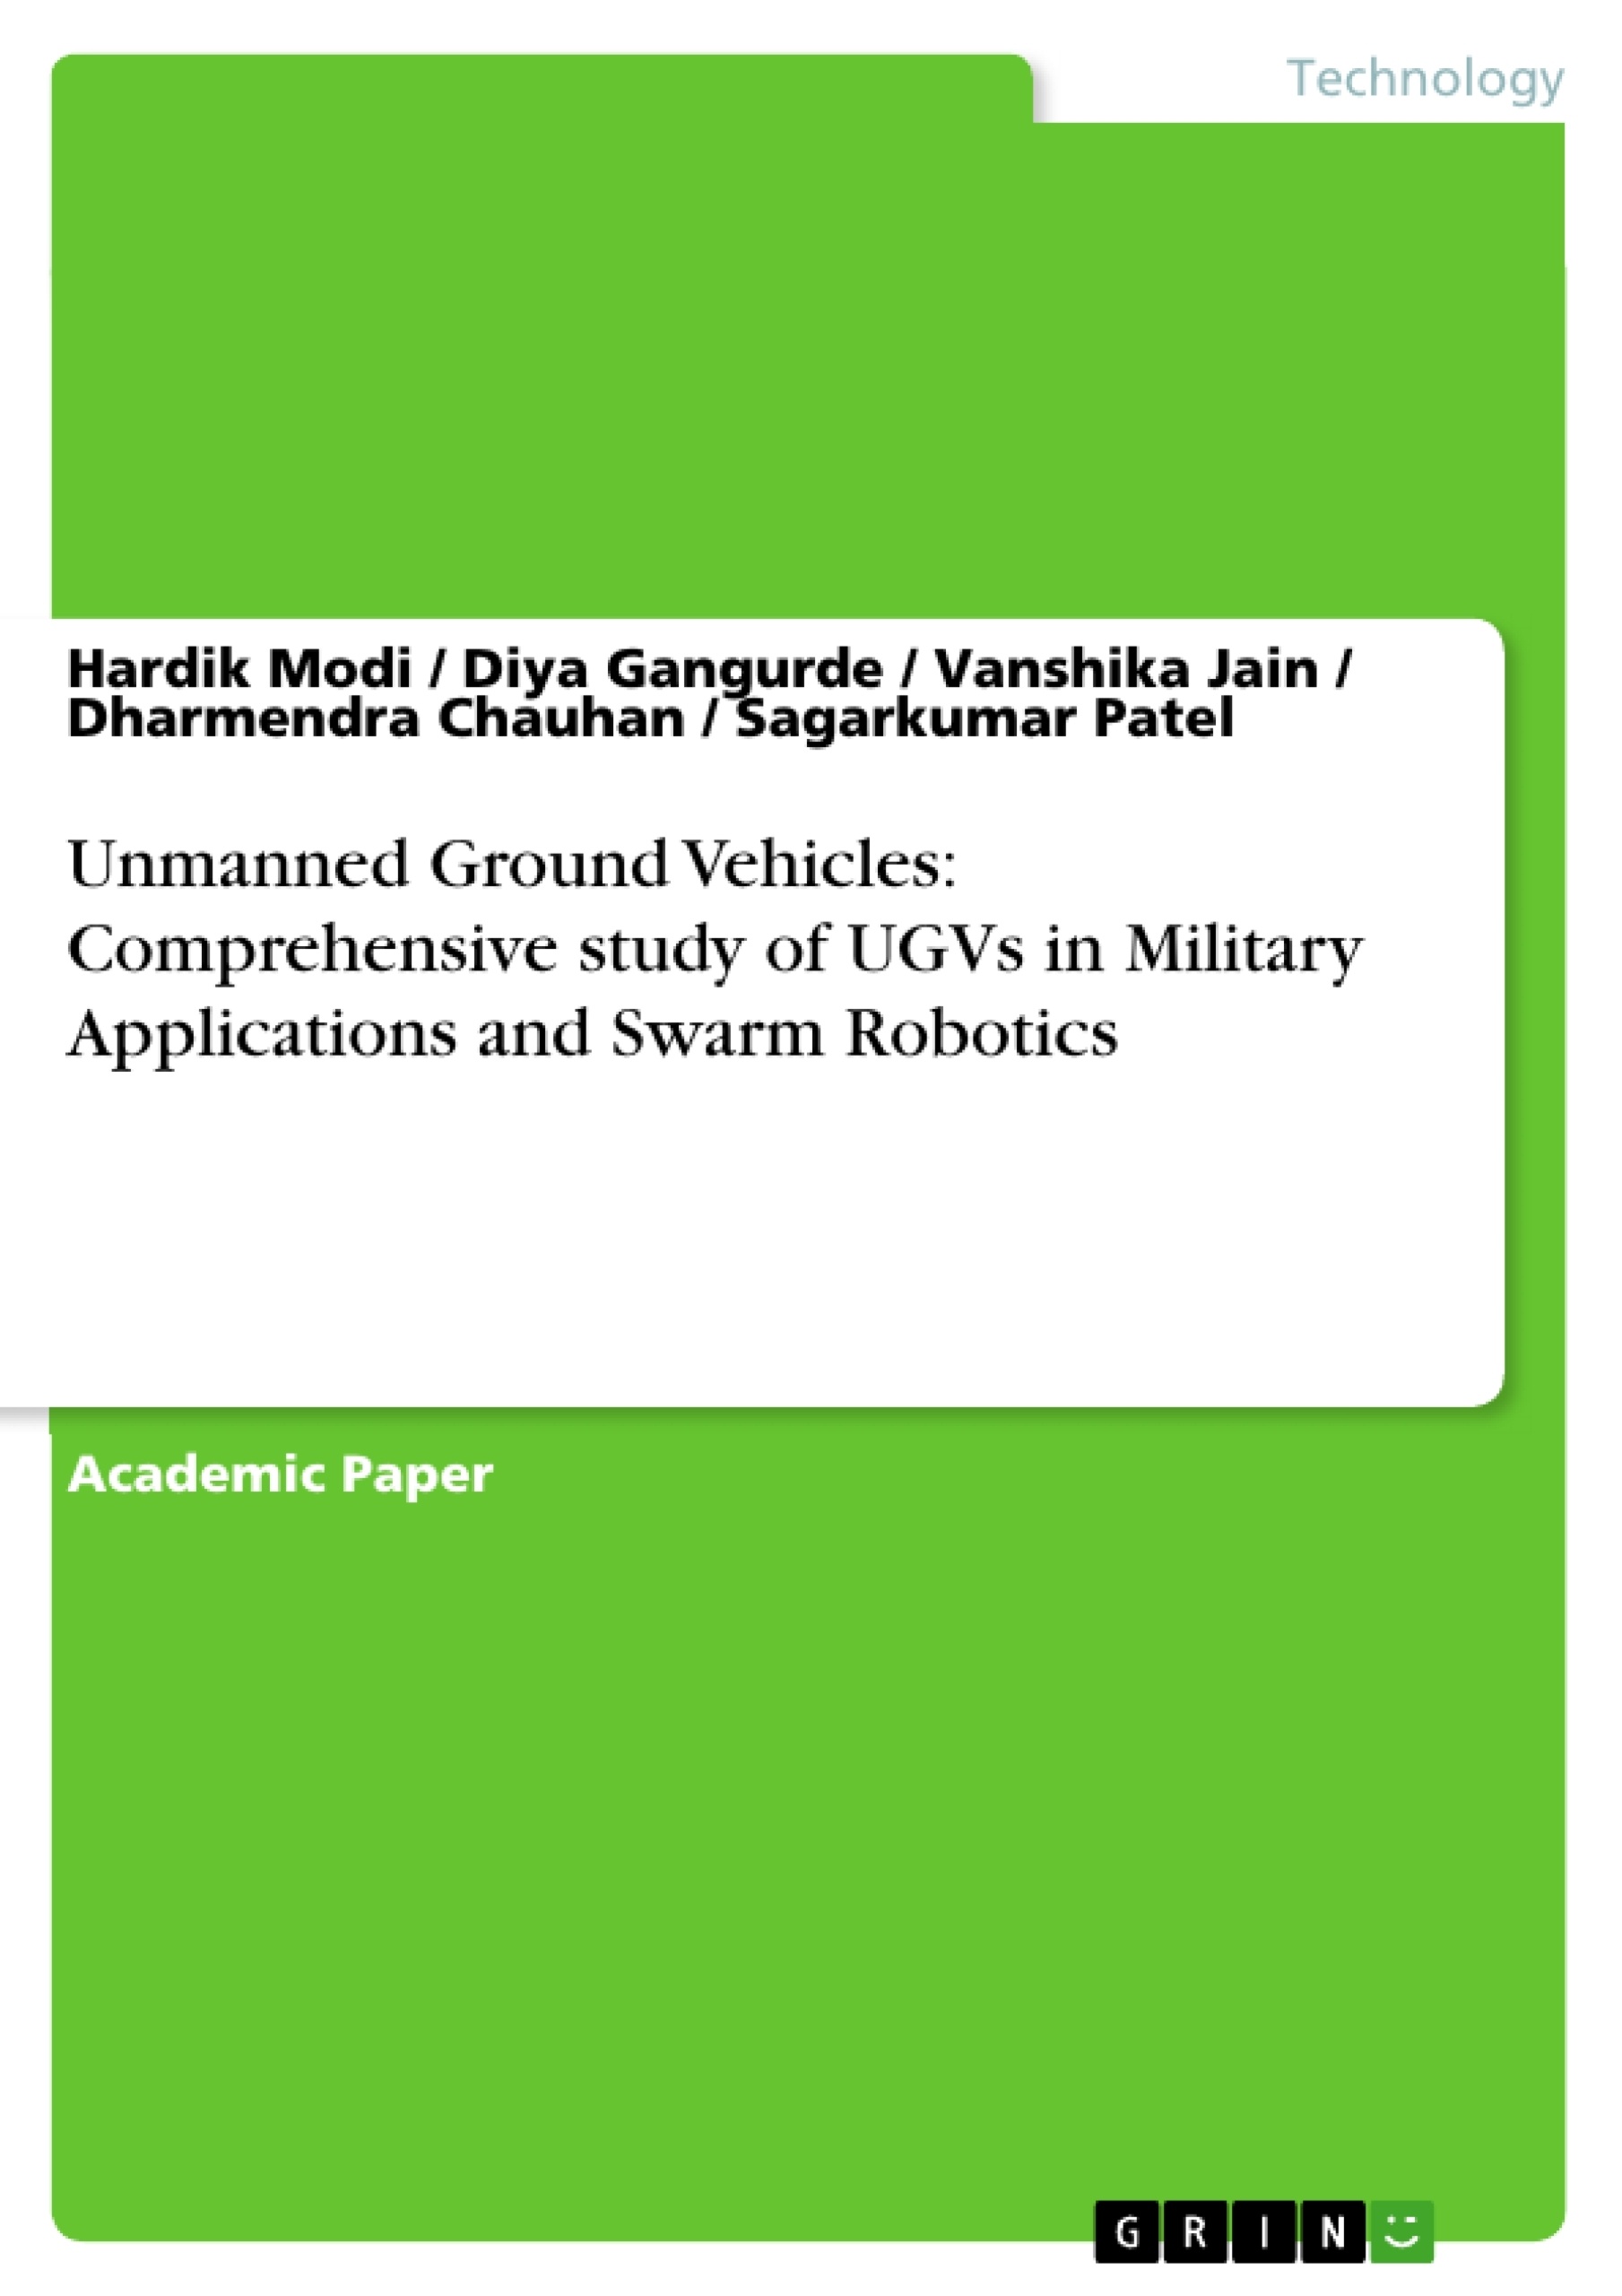 Title: Unmanned Ground Vehicles: Comprehensive study of UGVs in Military Applications and Swarm Robotics